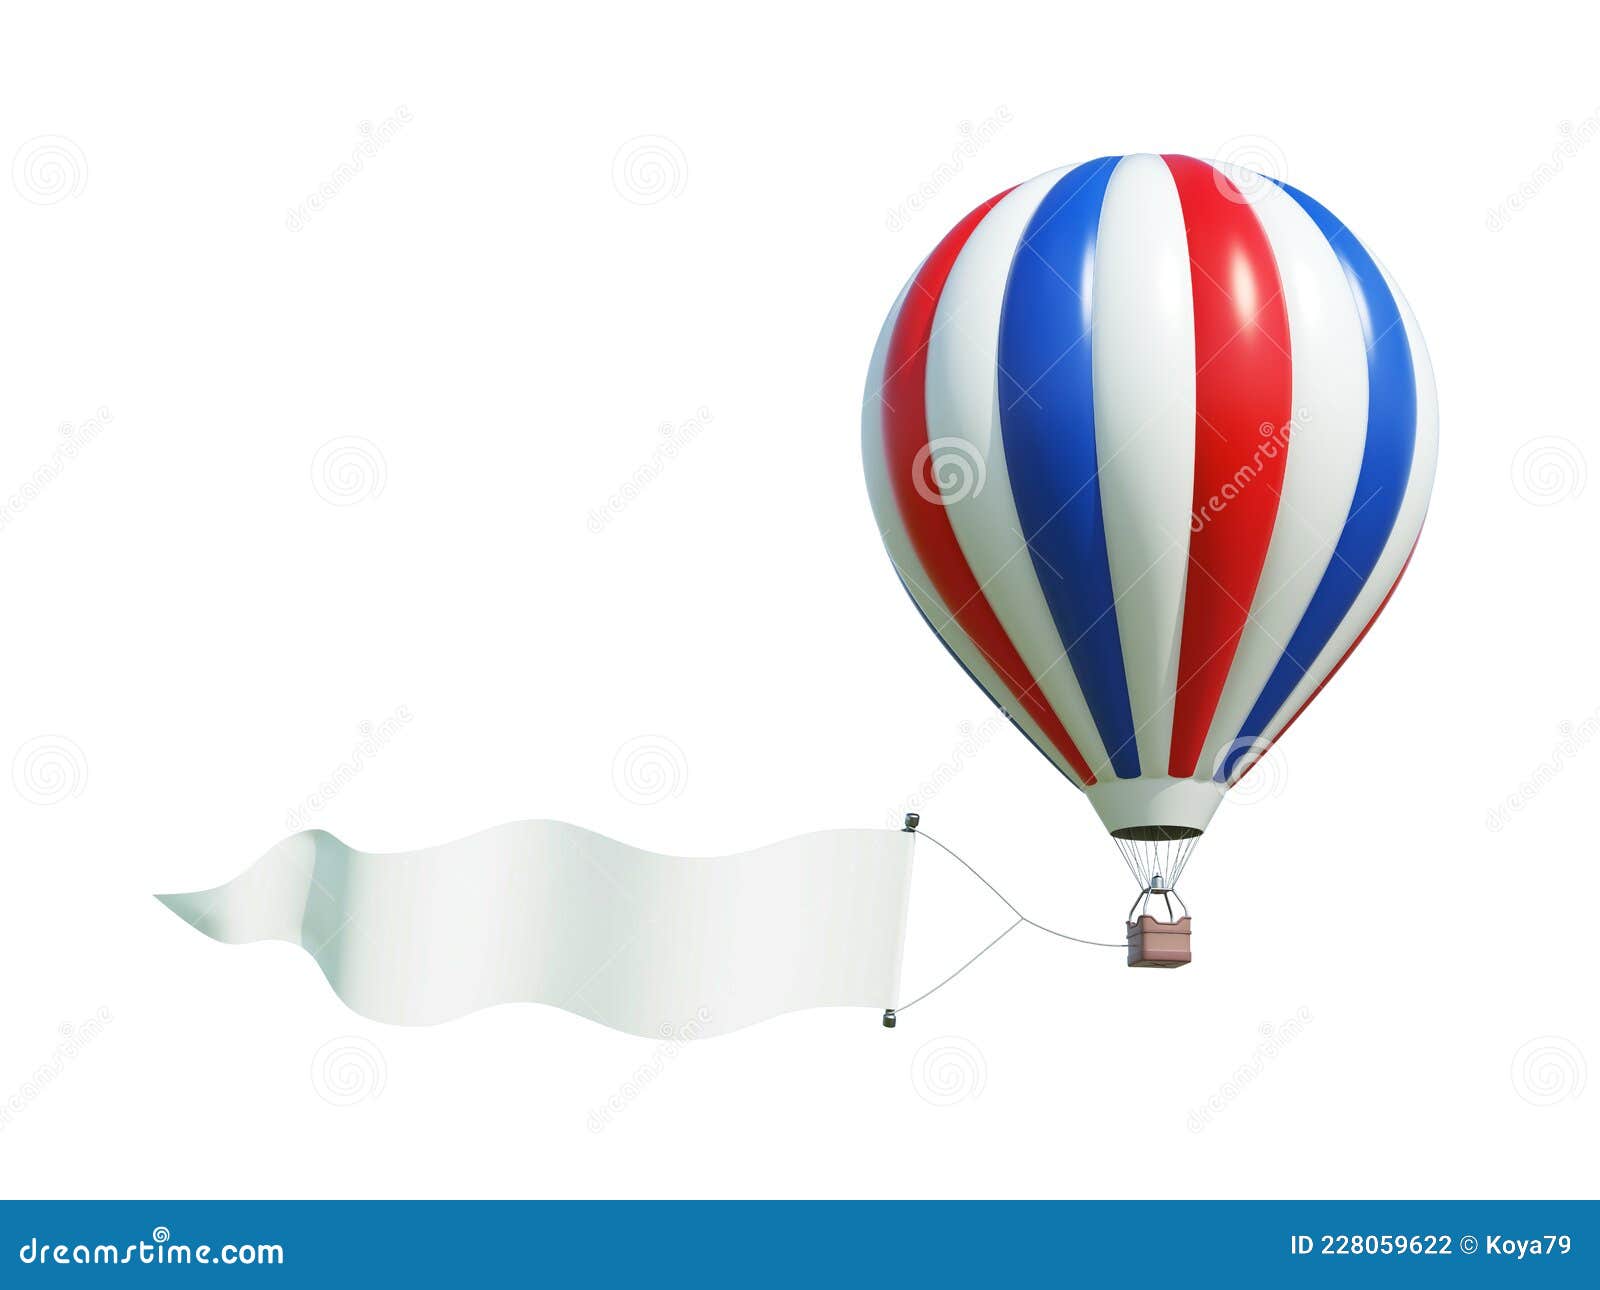 air balloon with sky banner, areal advertisement 3d rendering